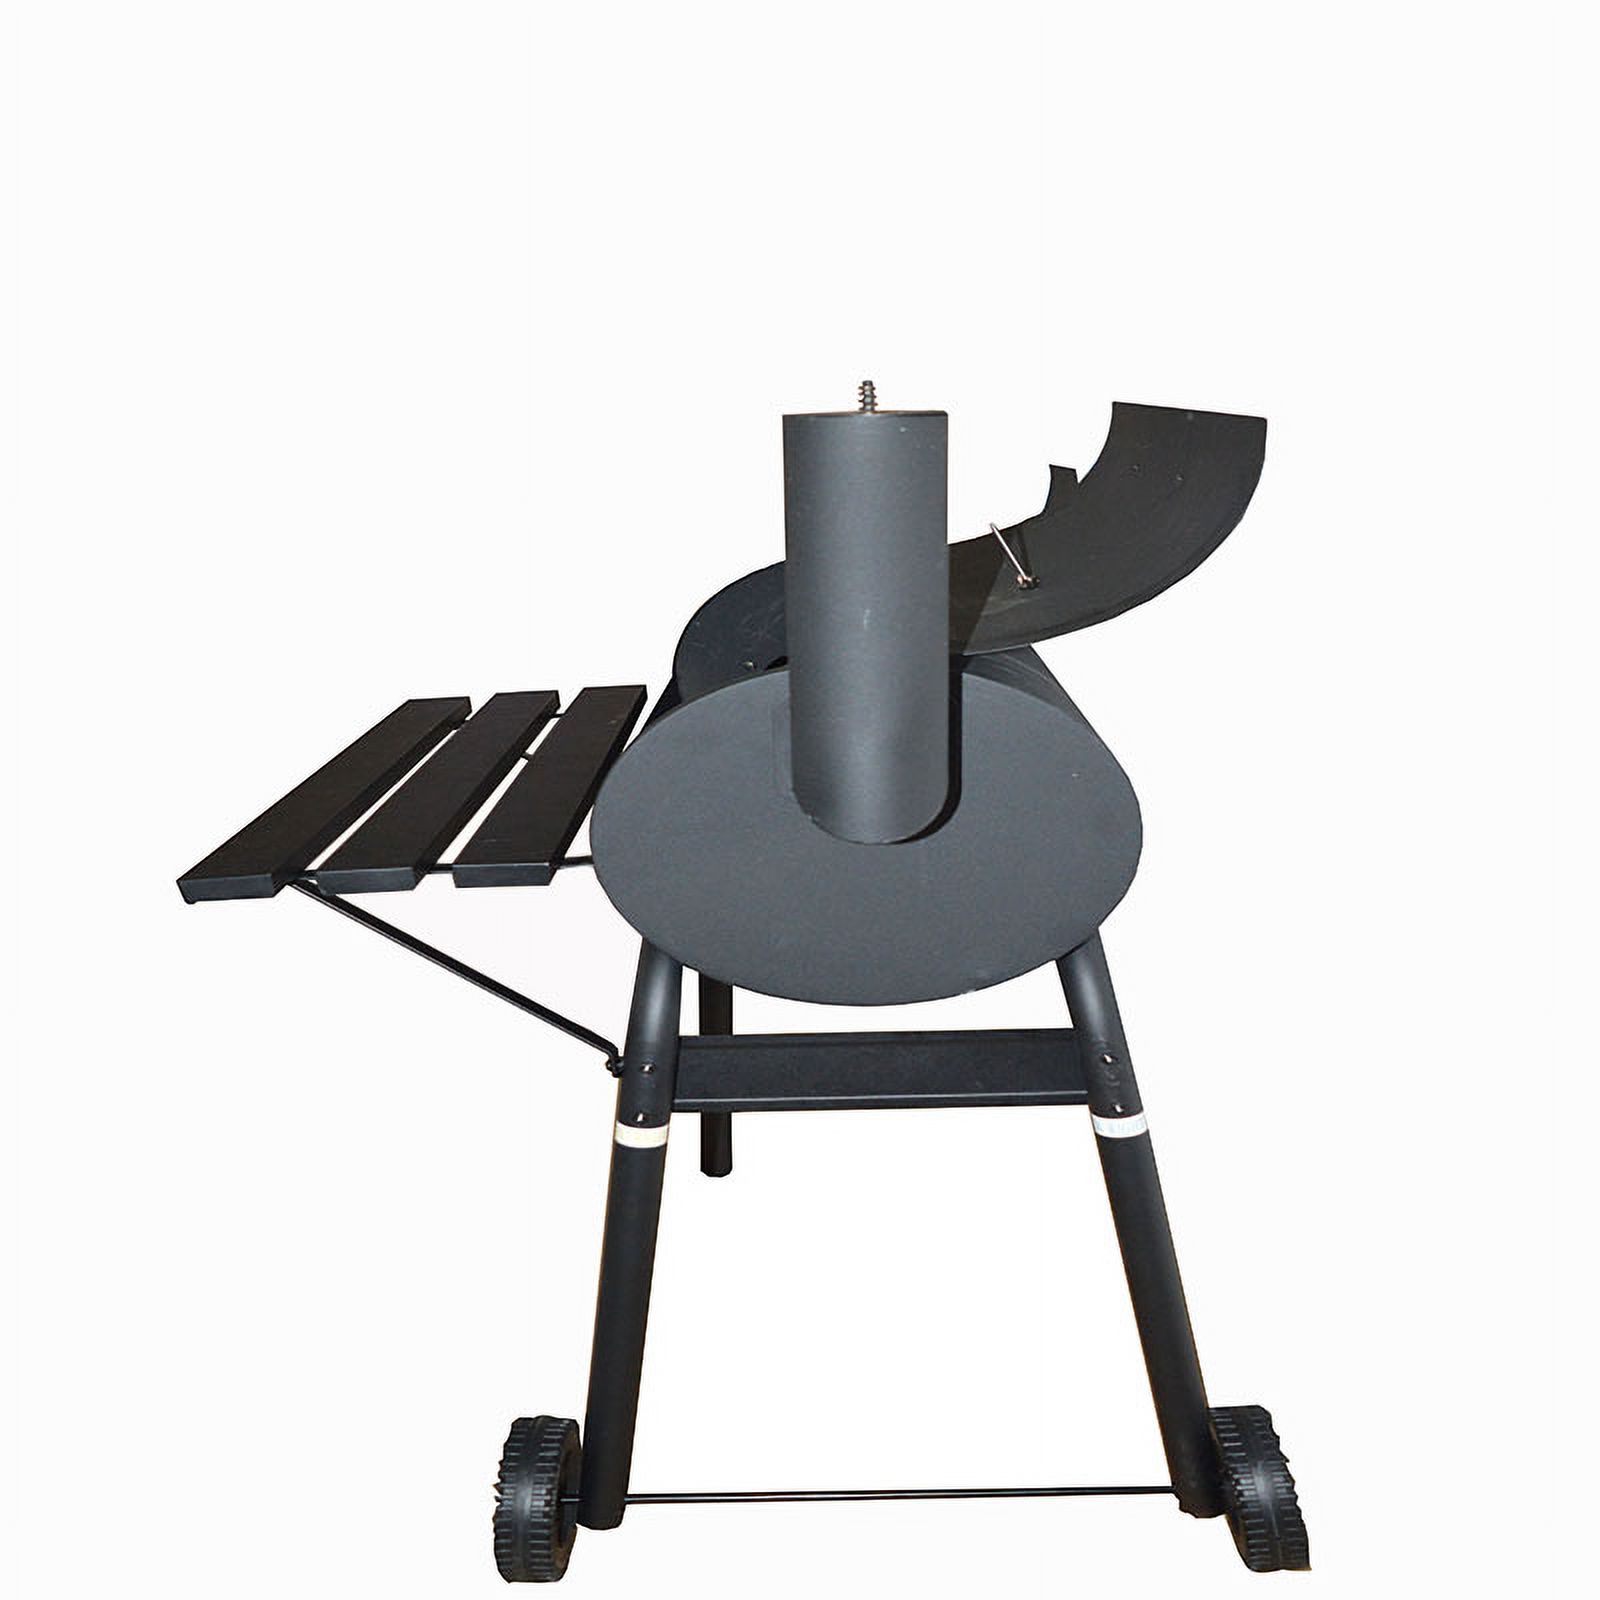 INTBUYING Outdoor BBQ Grill Camping Garden Charcoal Barbecue Stove Grills - image 4 of 8